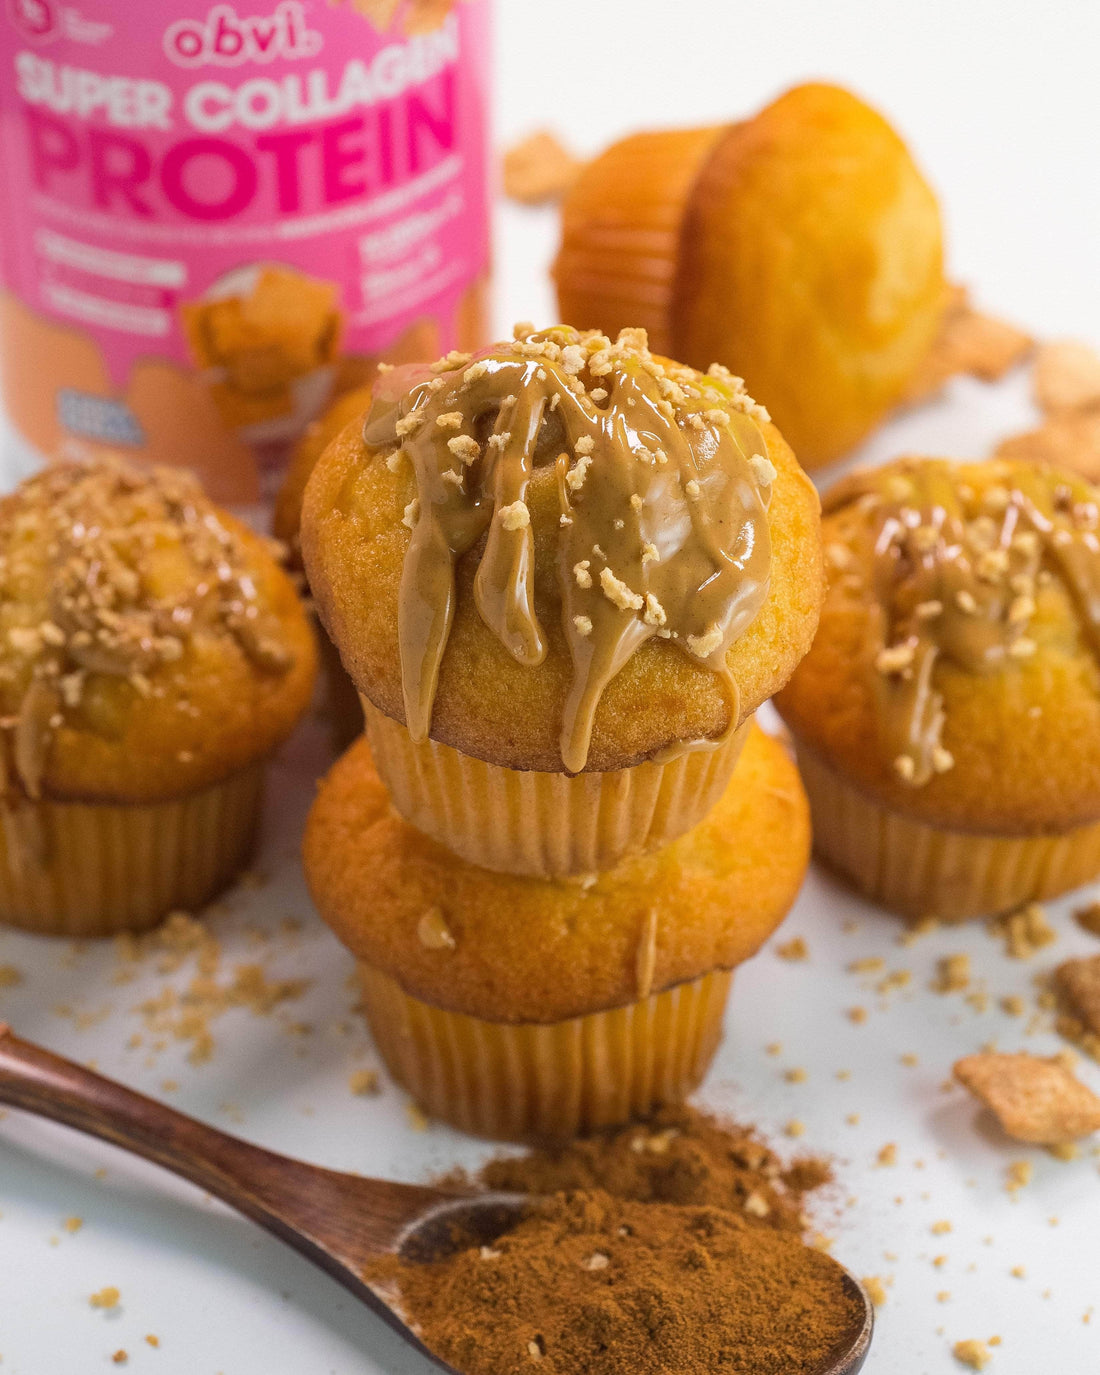 Cinna Cereal Muffins with Peanut Butter